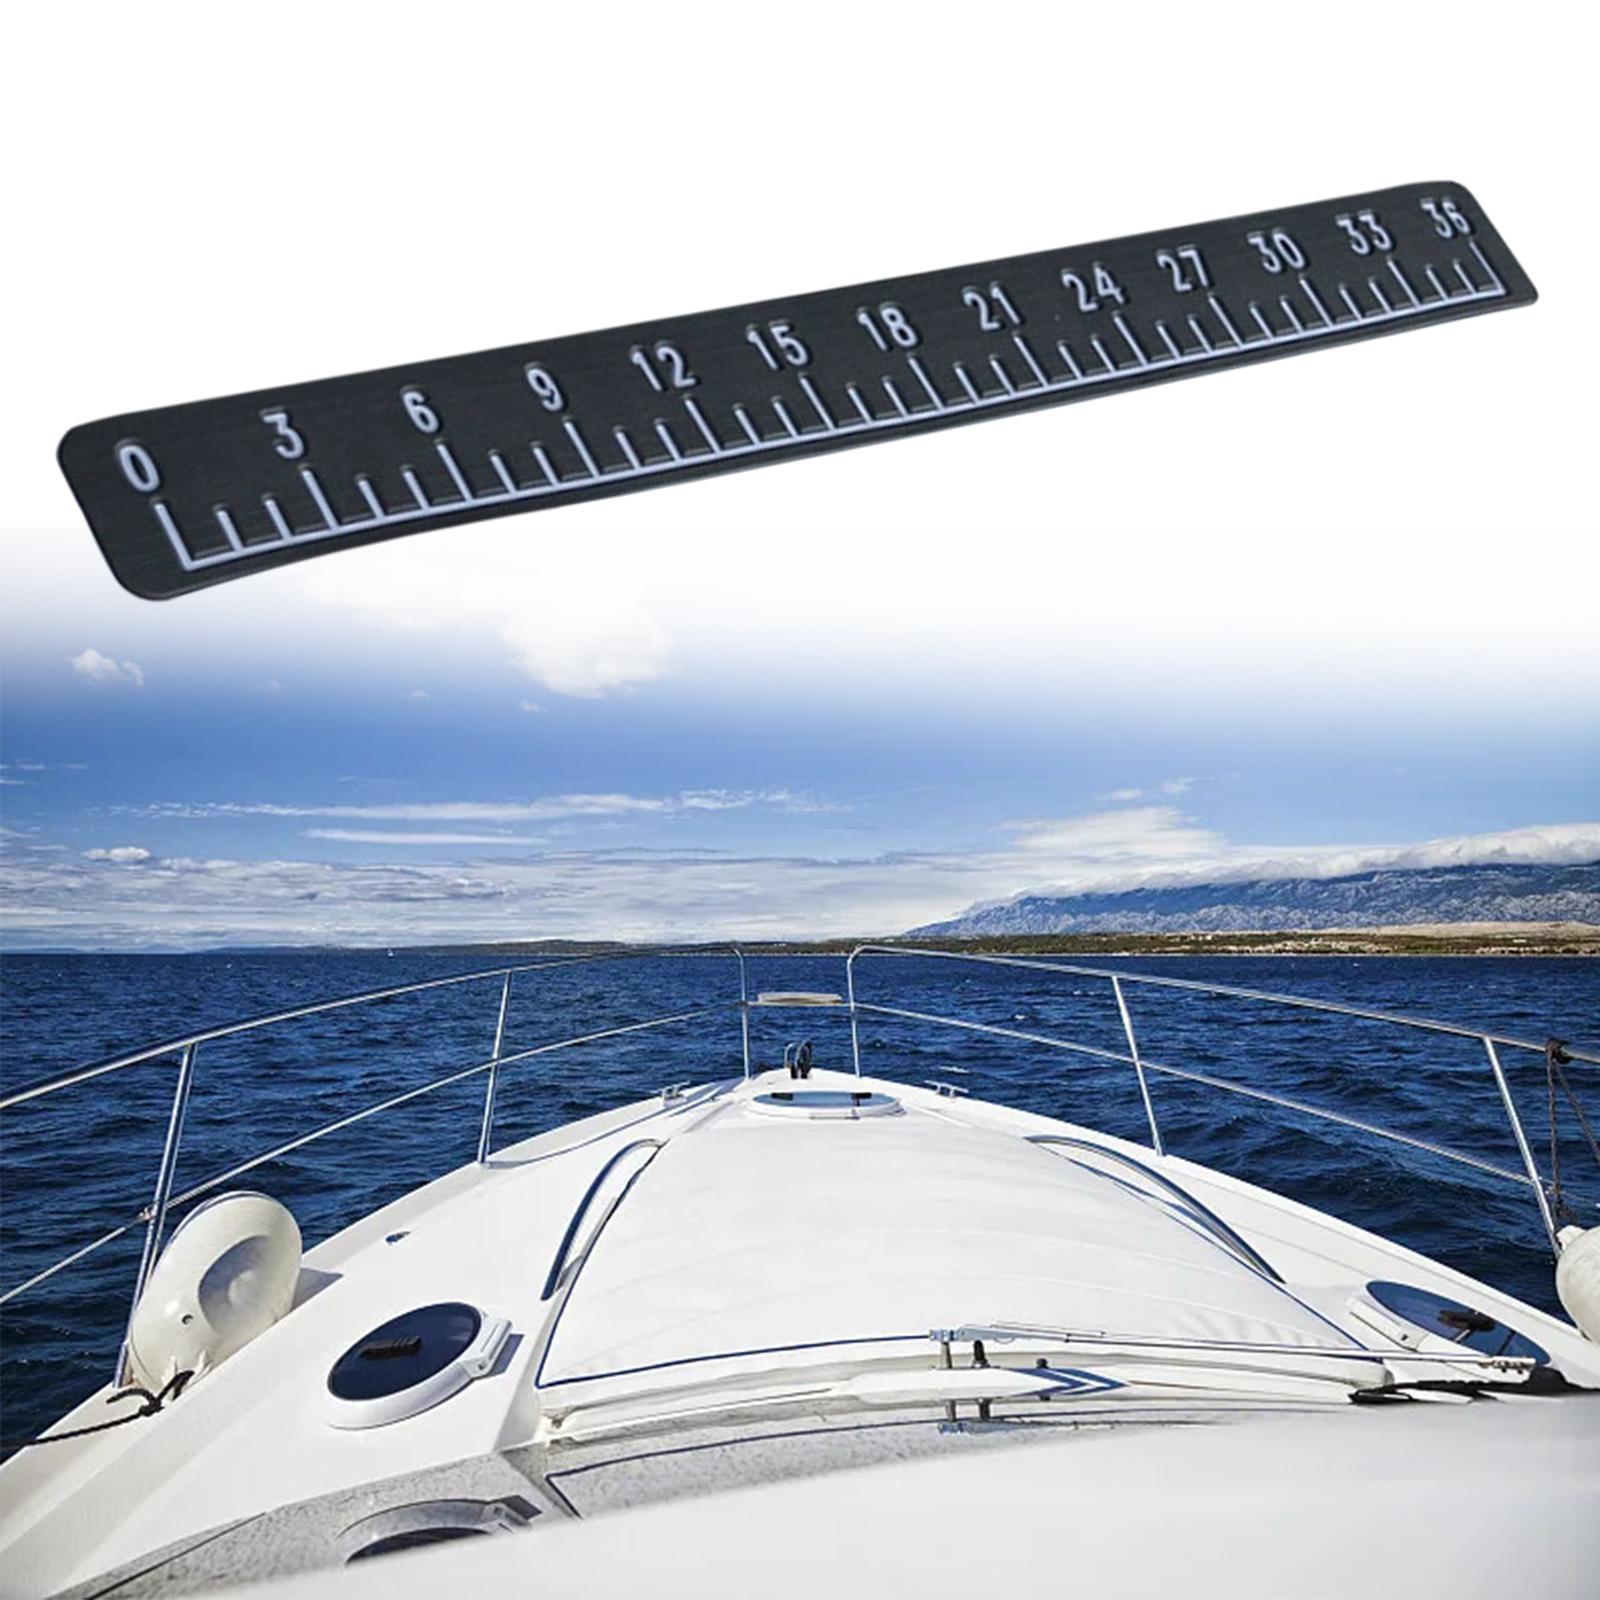 39" Fish Ruler for Boat Accurate 6mm Thickness High Density for Sailboats dark gray white